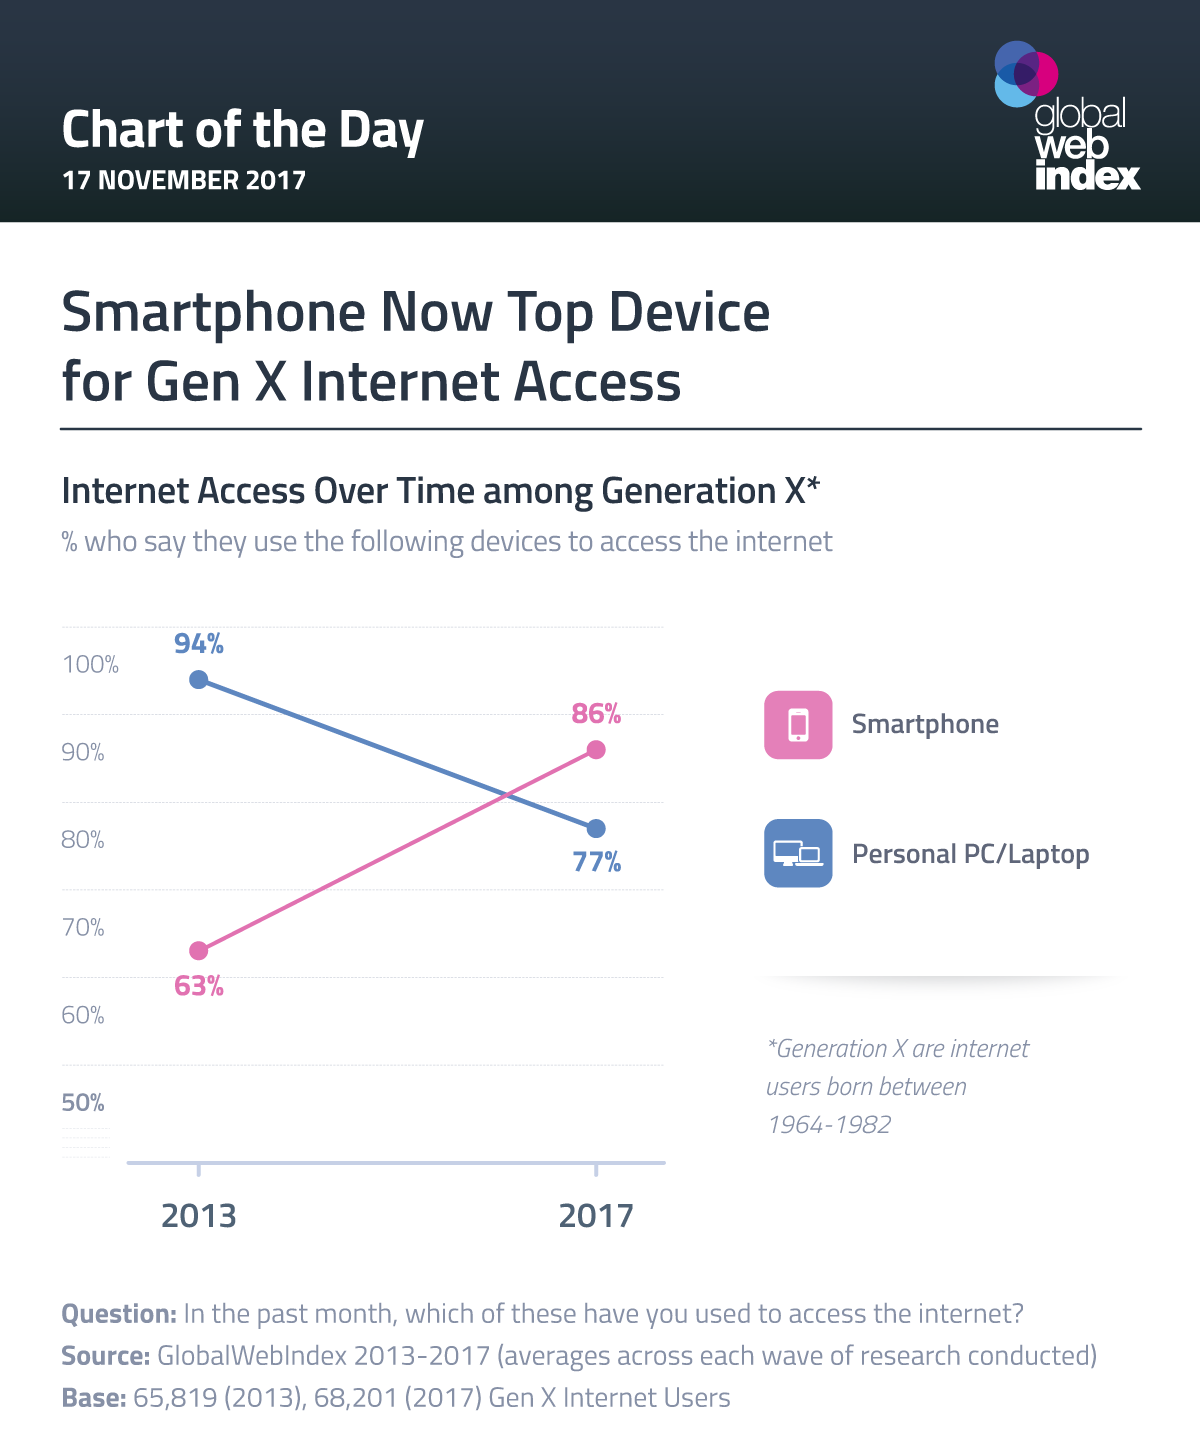 This visible shift among Gen X – who had to adapt to the digital revolution in early adulthood – is just another sign of how smartphones continue to strengthen their position as the primary internet device.  That said, this trend is yet to be observed for our oldest tracked generation, Baby Boomers, who continue to be most likely to be reaching for PCs/laptops to get online (88% vs. 70% for smartphone).